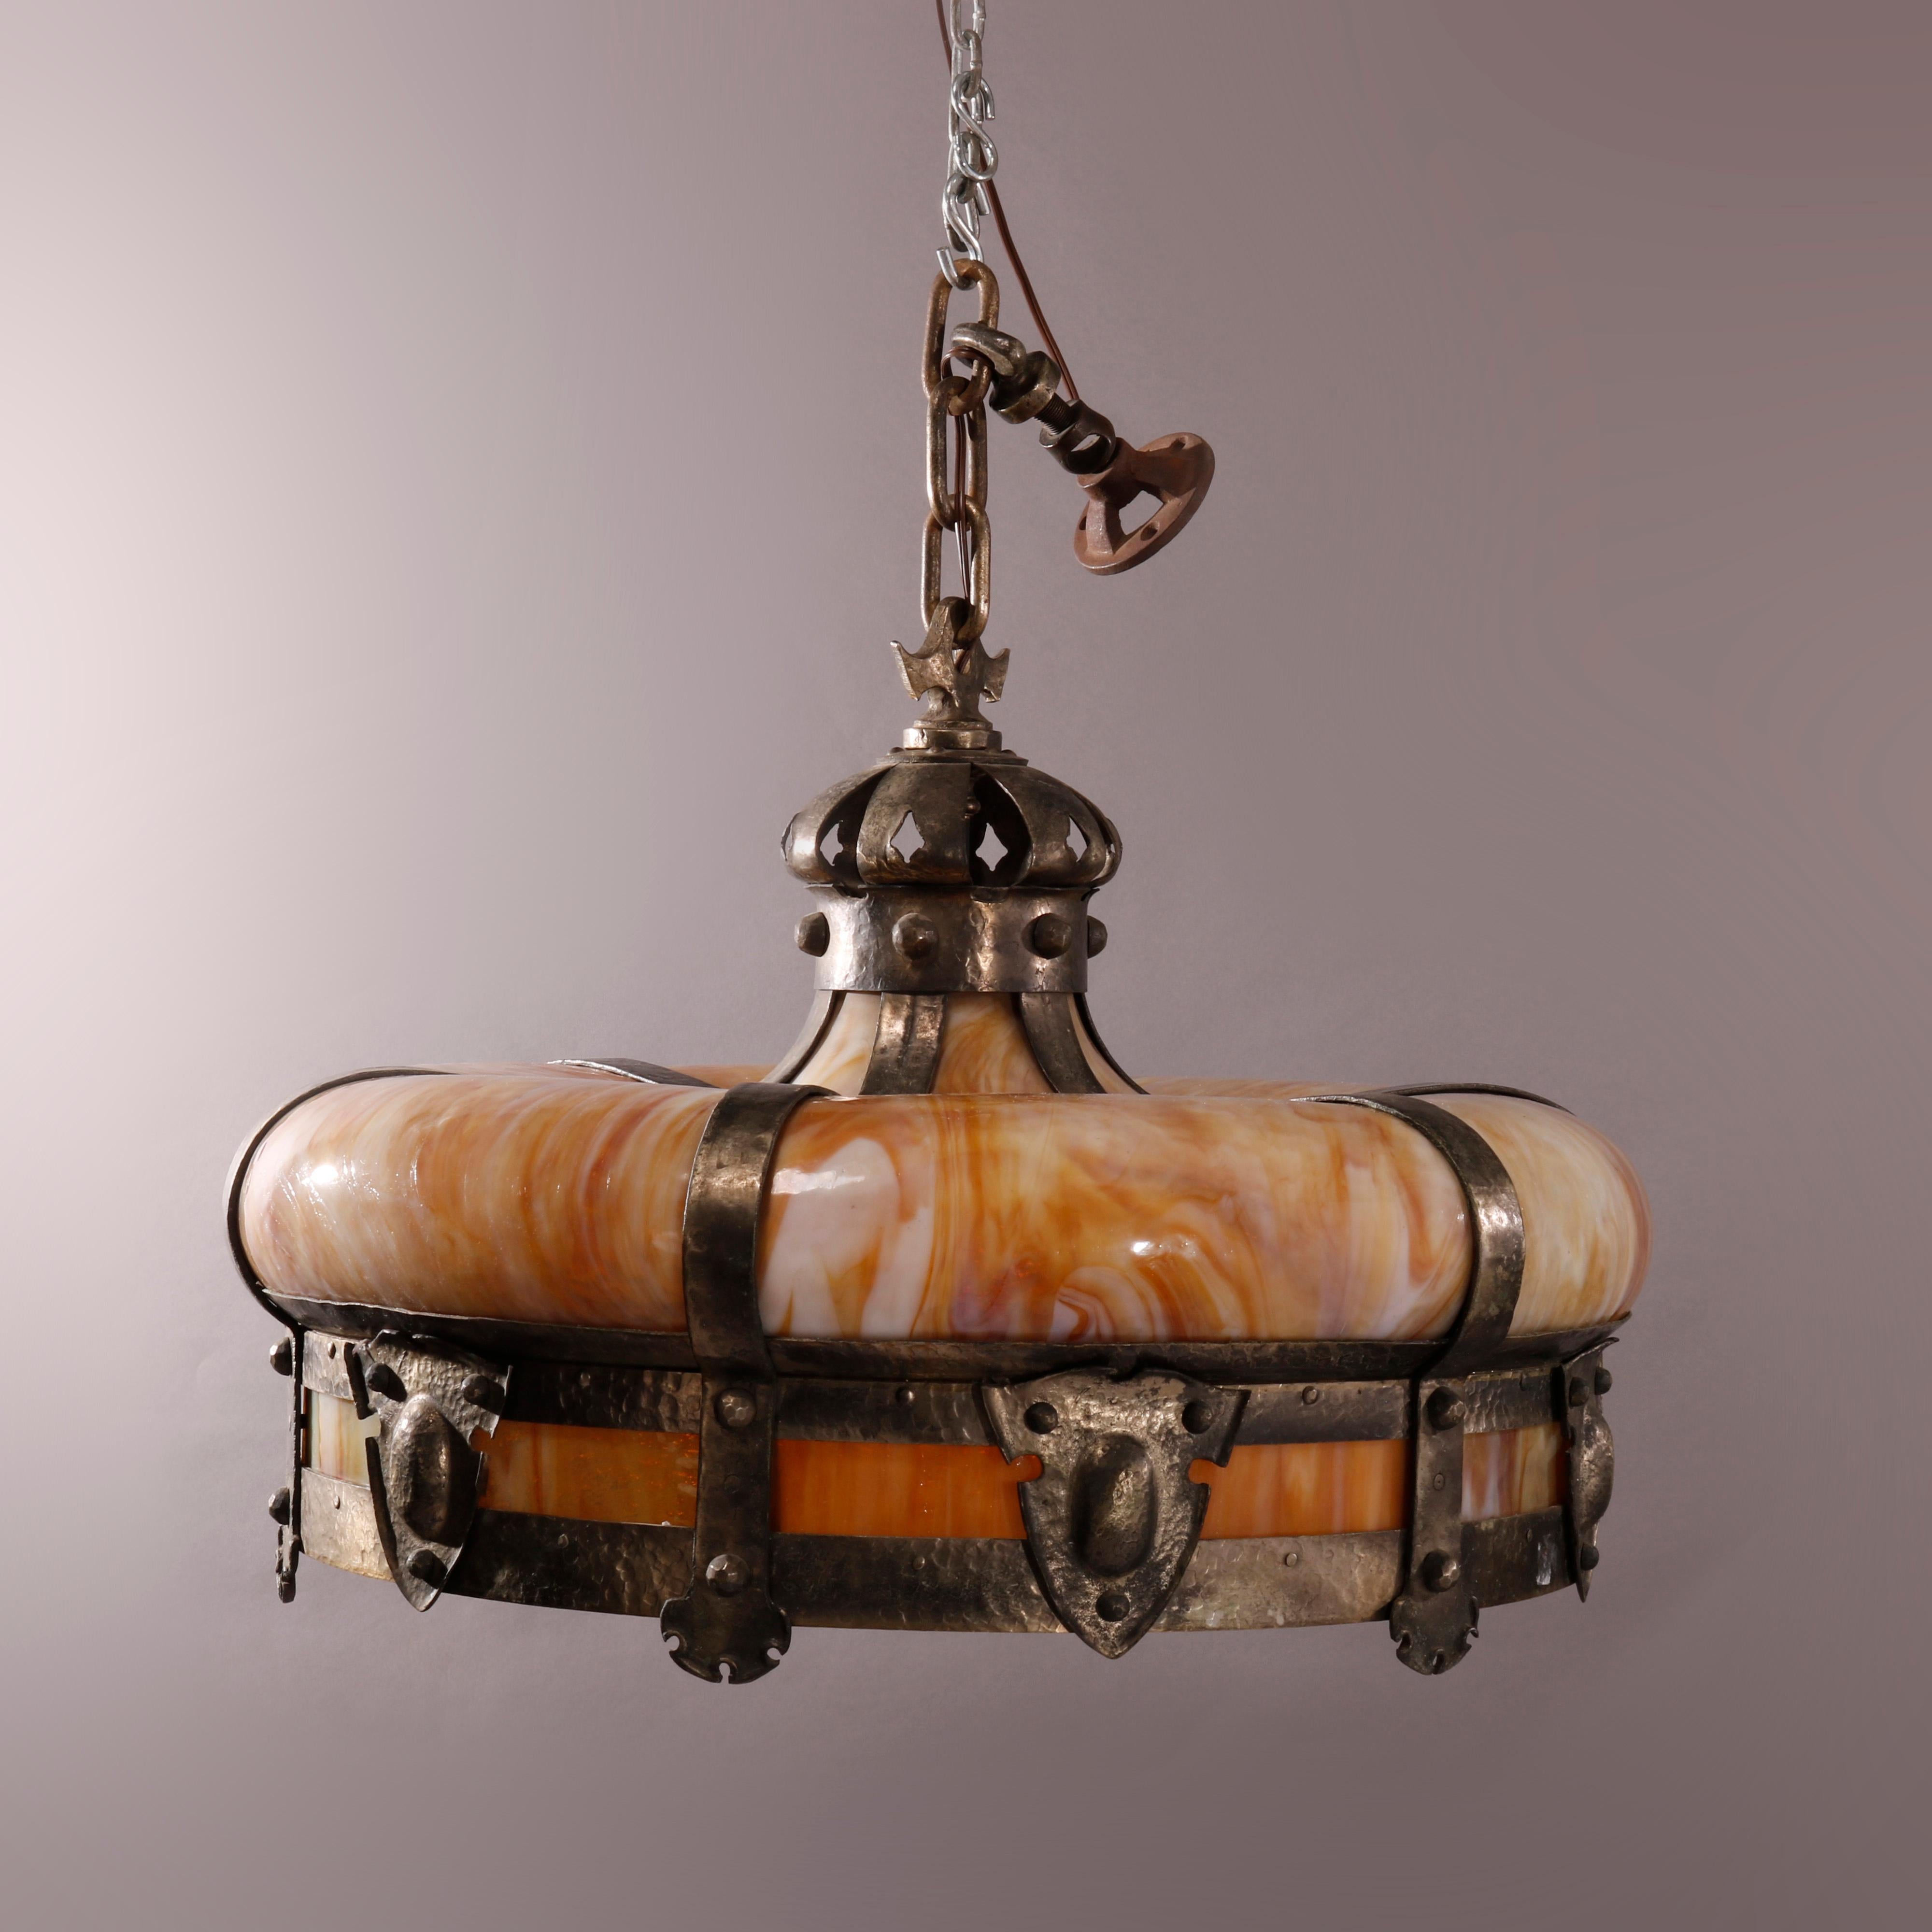 An antique Arts and Crafts hanging four-light fixture offers crown form with bent slag glass and hammered metal straps having shield form reserves, c1920

Measures - 30'' H x 27'' W x 27'' D.